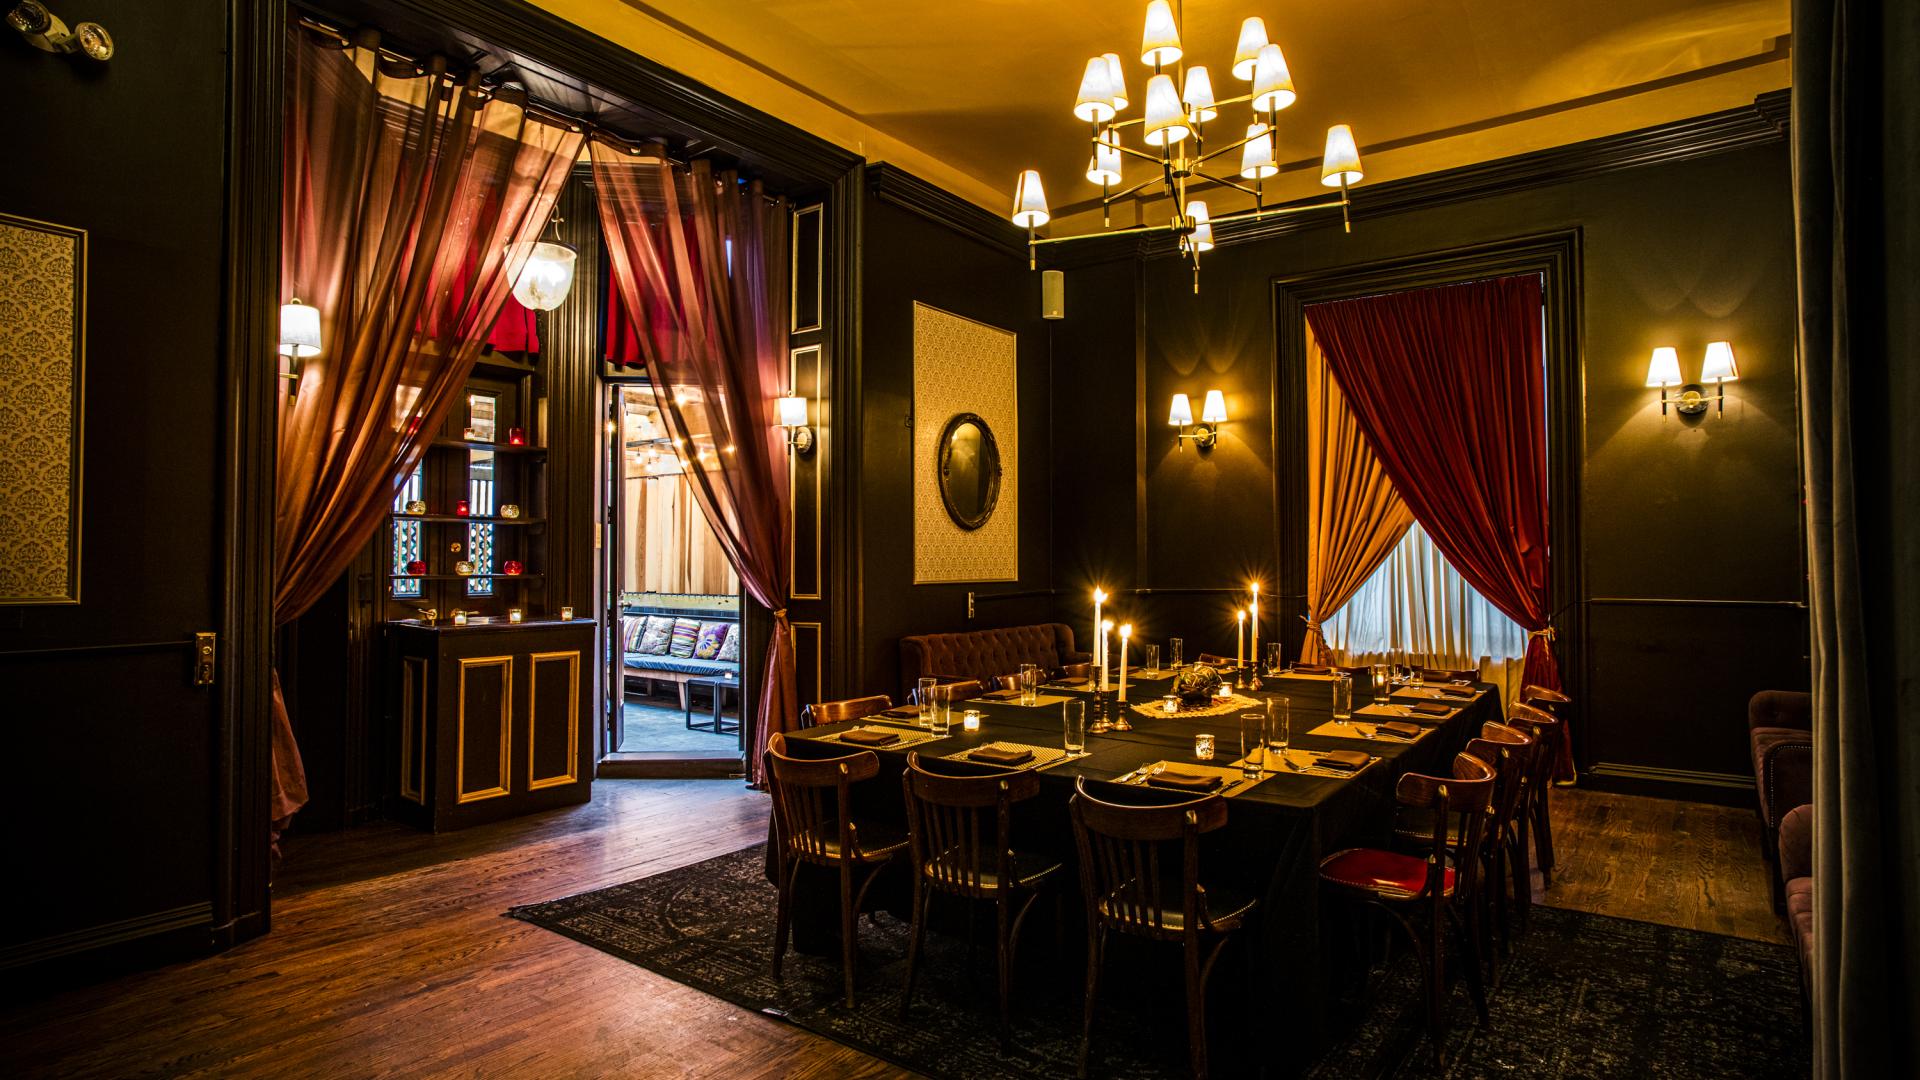 Restaurants with Function Rooms for Rent in Boston, MA